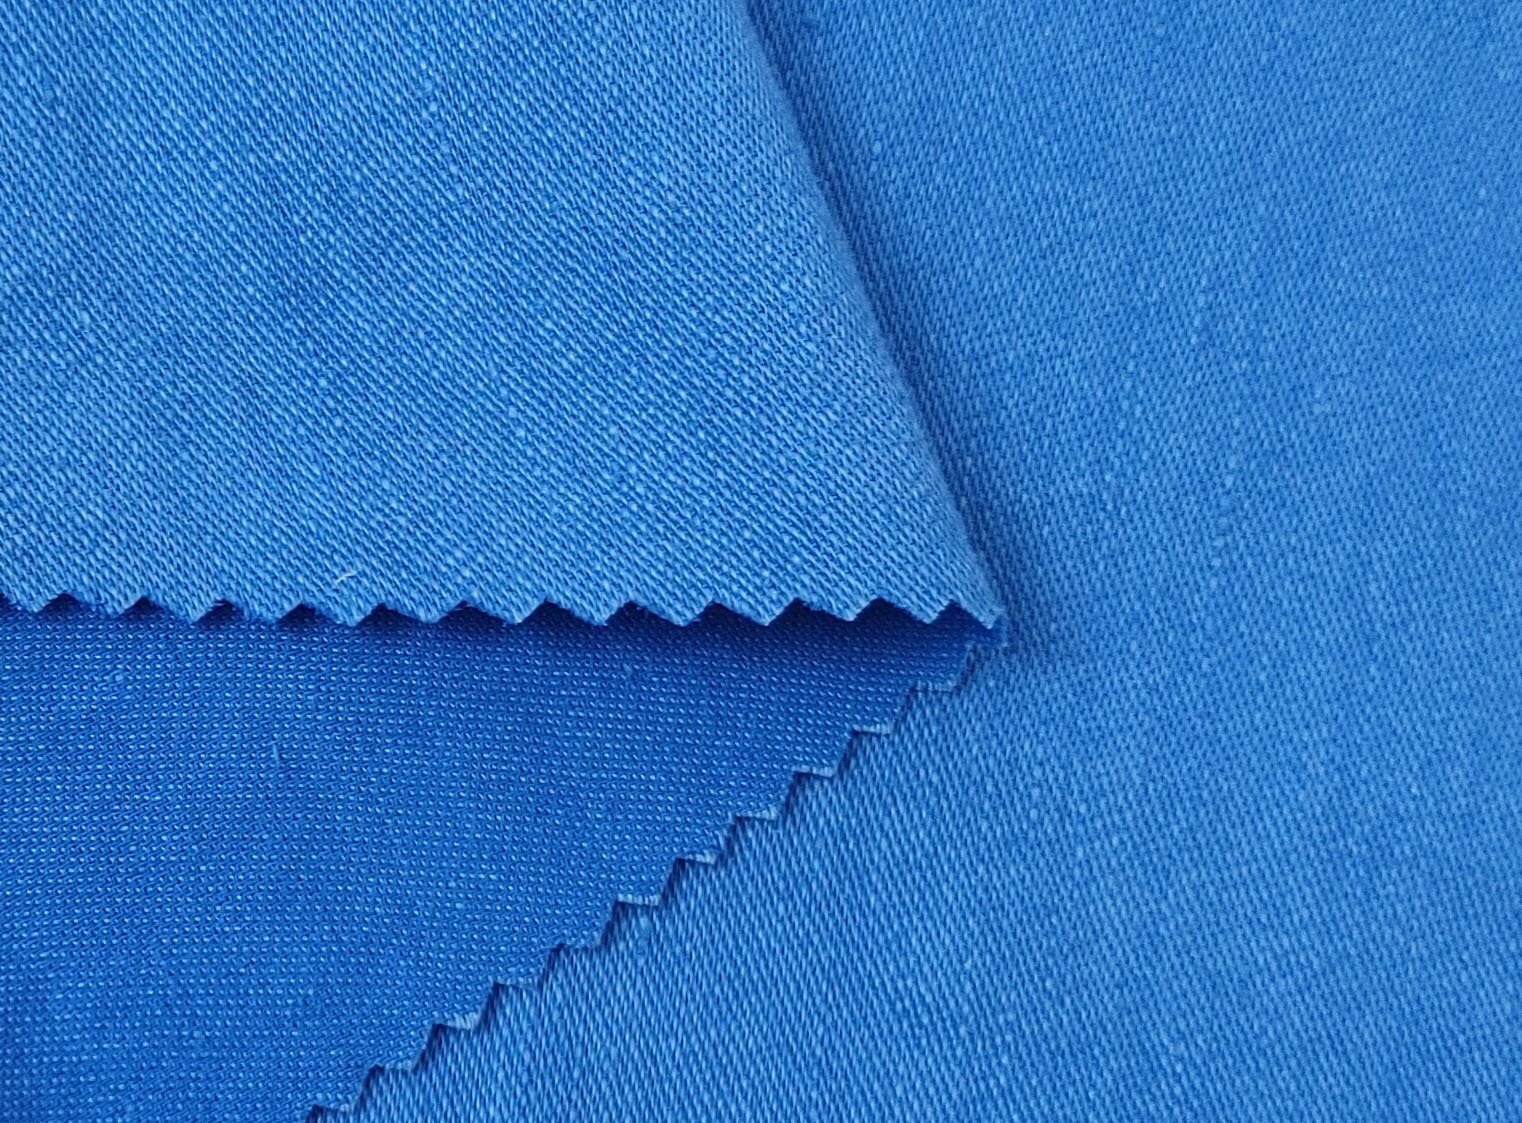 Satin Elegance: Linen Rayon Fabric with Polished Satin Weave 6090 6620 6659 7472 7293 - The Linen Lab - Blue